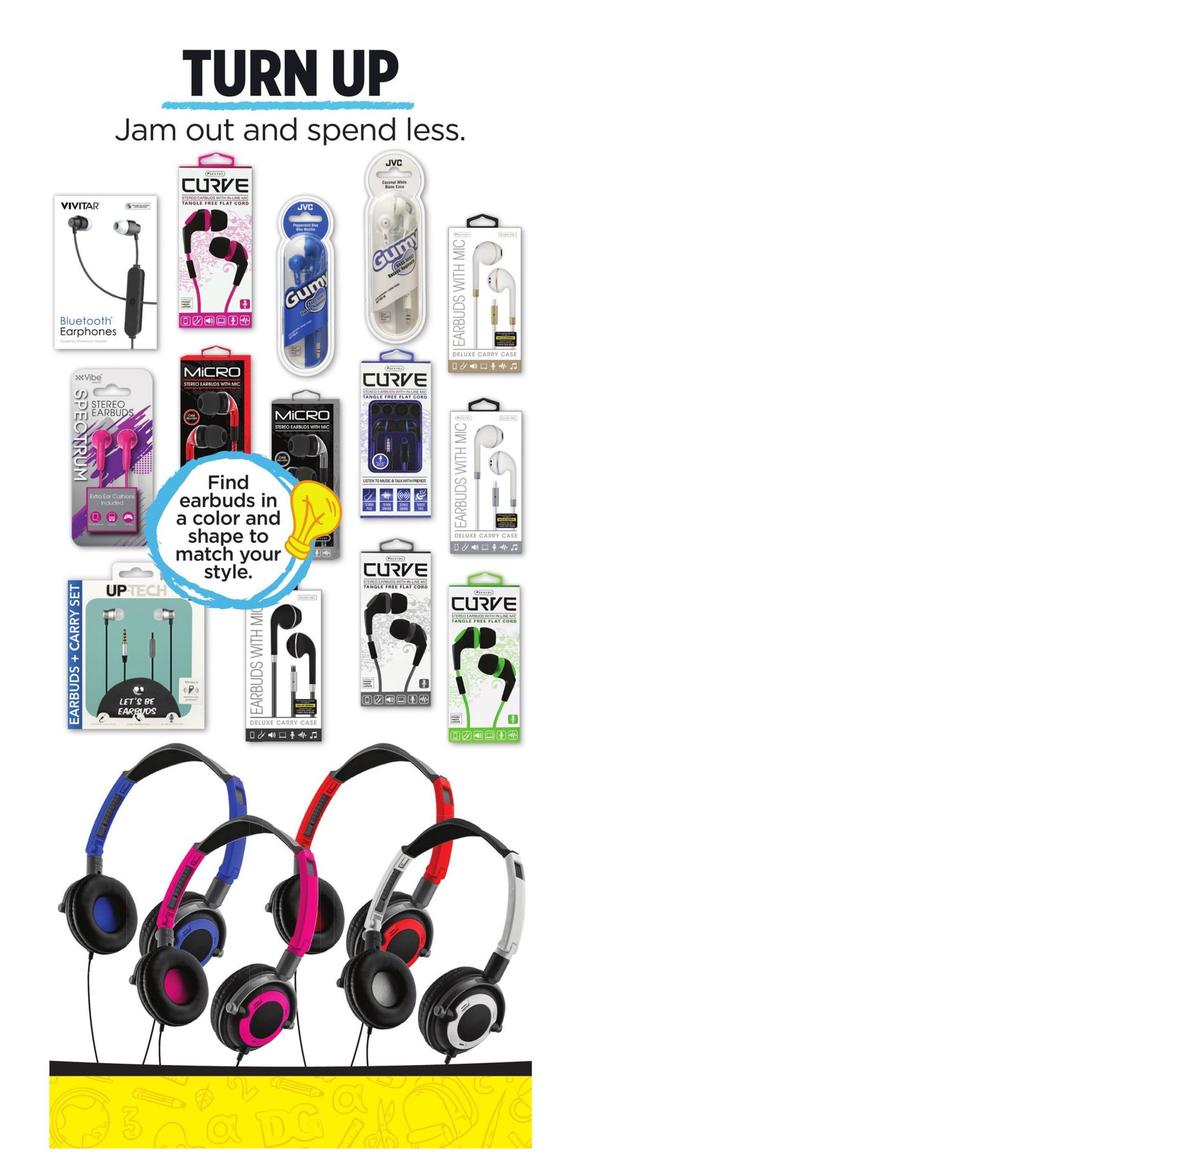 Dollar General Back to School Savings at DG! Weekly Ad from July 7